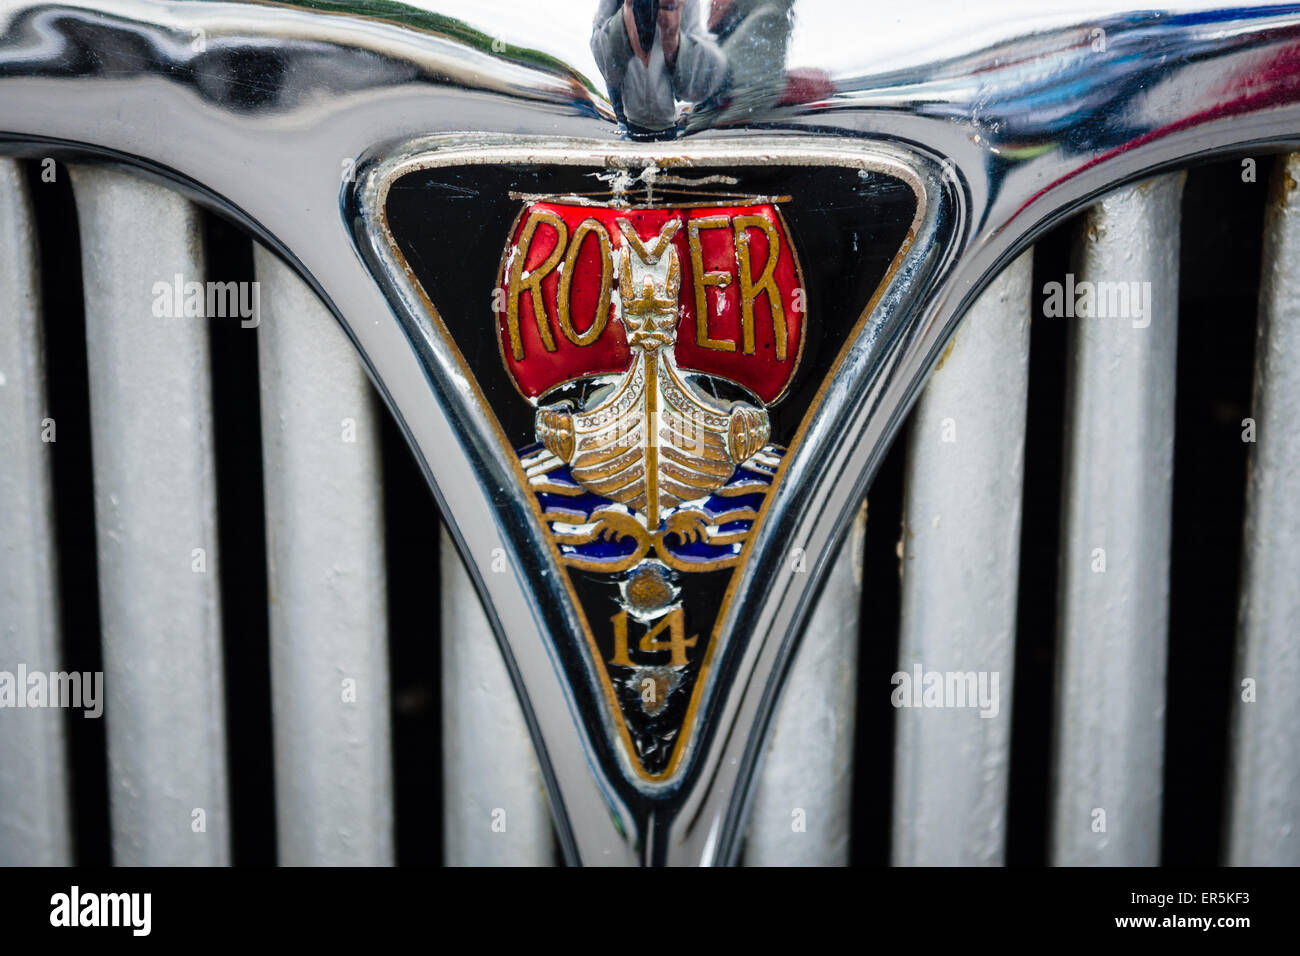 BERLIN - MAY 10, 2015: Emblem on the grill of a vintage car Rover 14. The 28th Berlin-Brandenburg Oldtimer Day Stock Photo